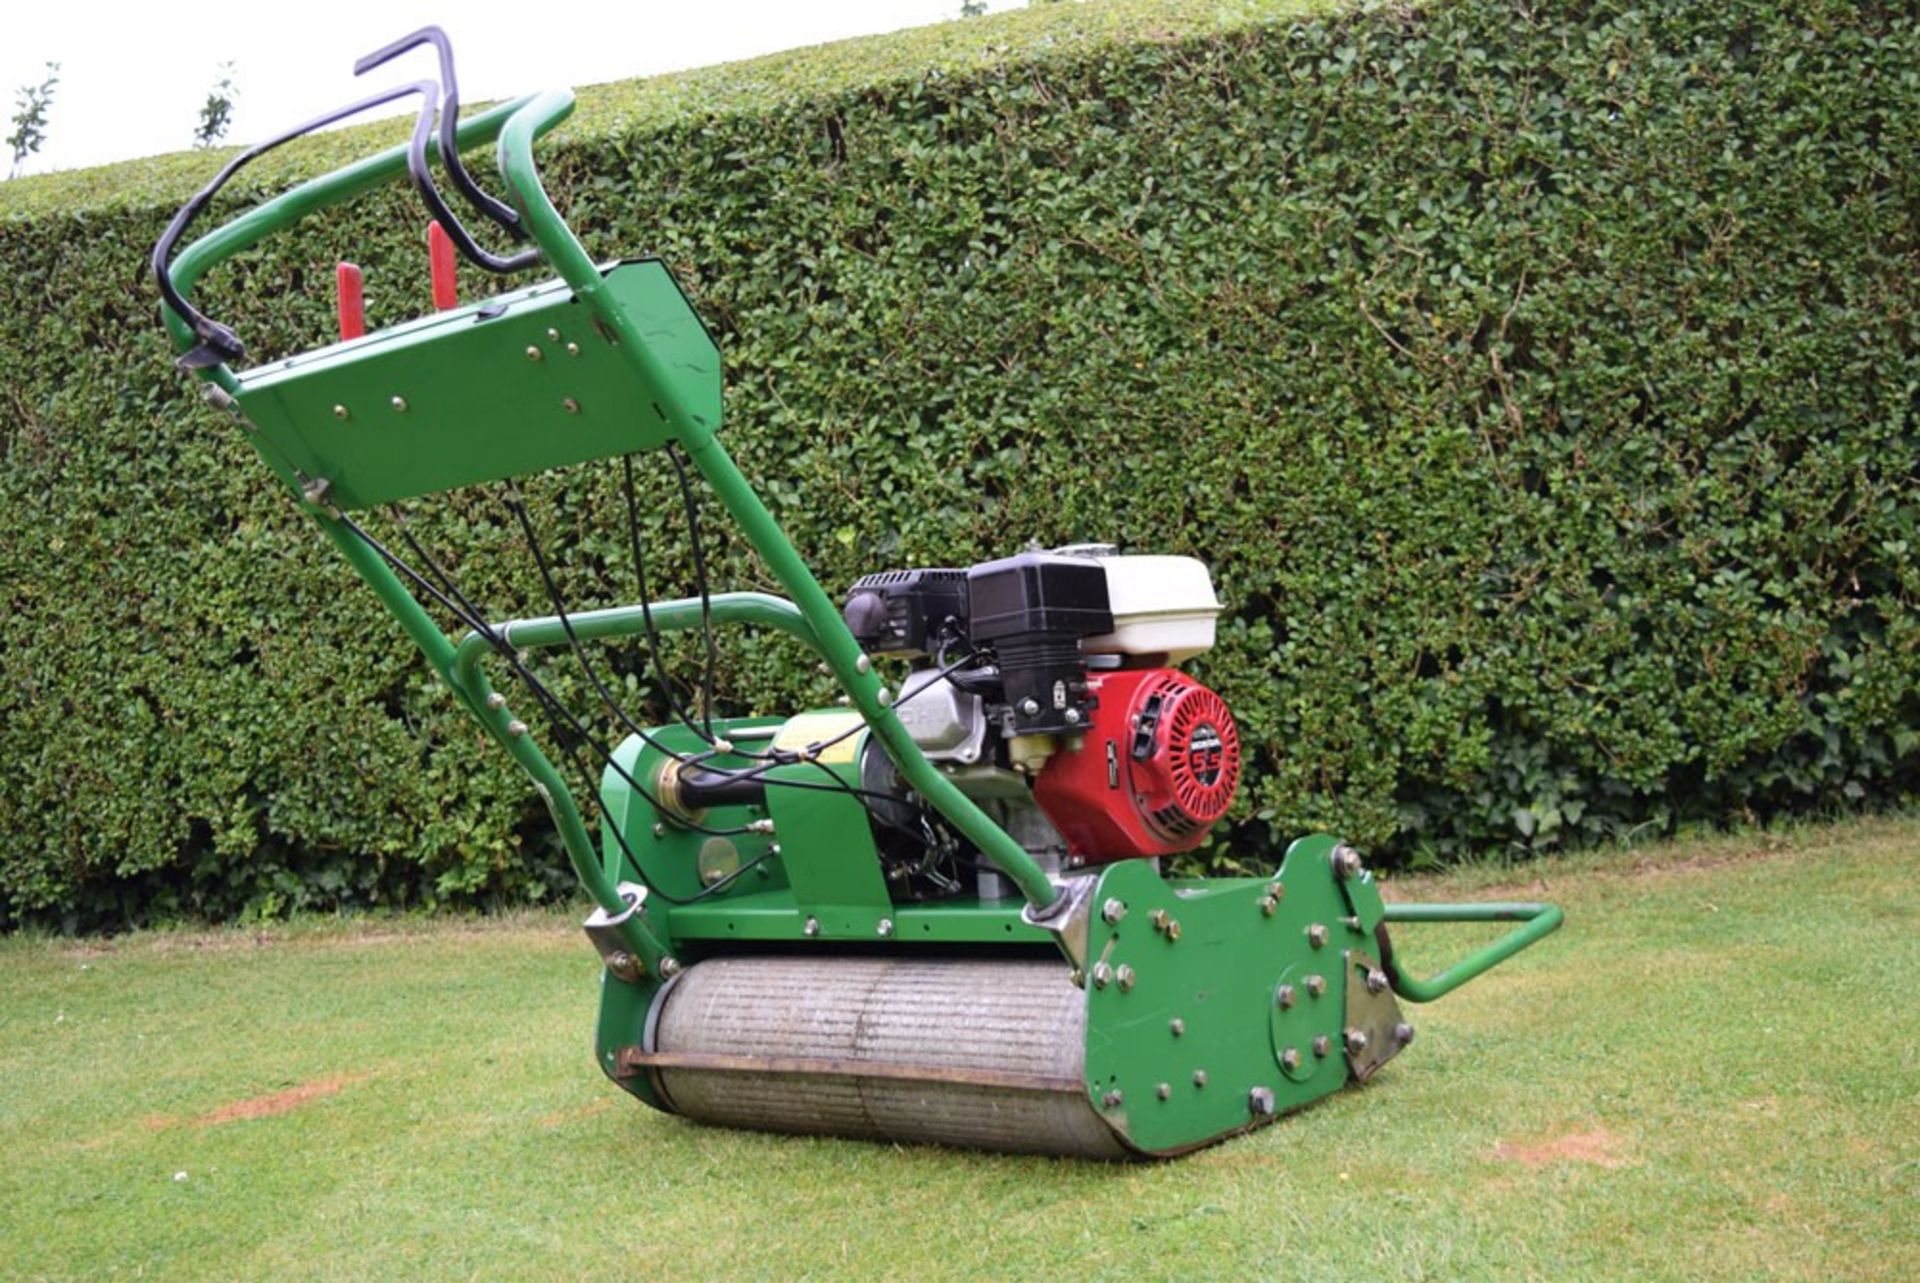 2004 Dennis G560 5 Blade Cylinder Mower With Grass Box - Image 9 of 12